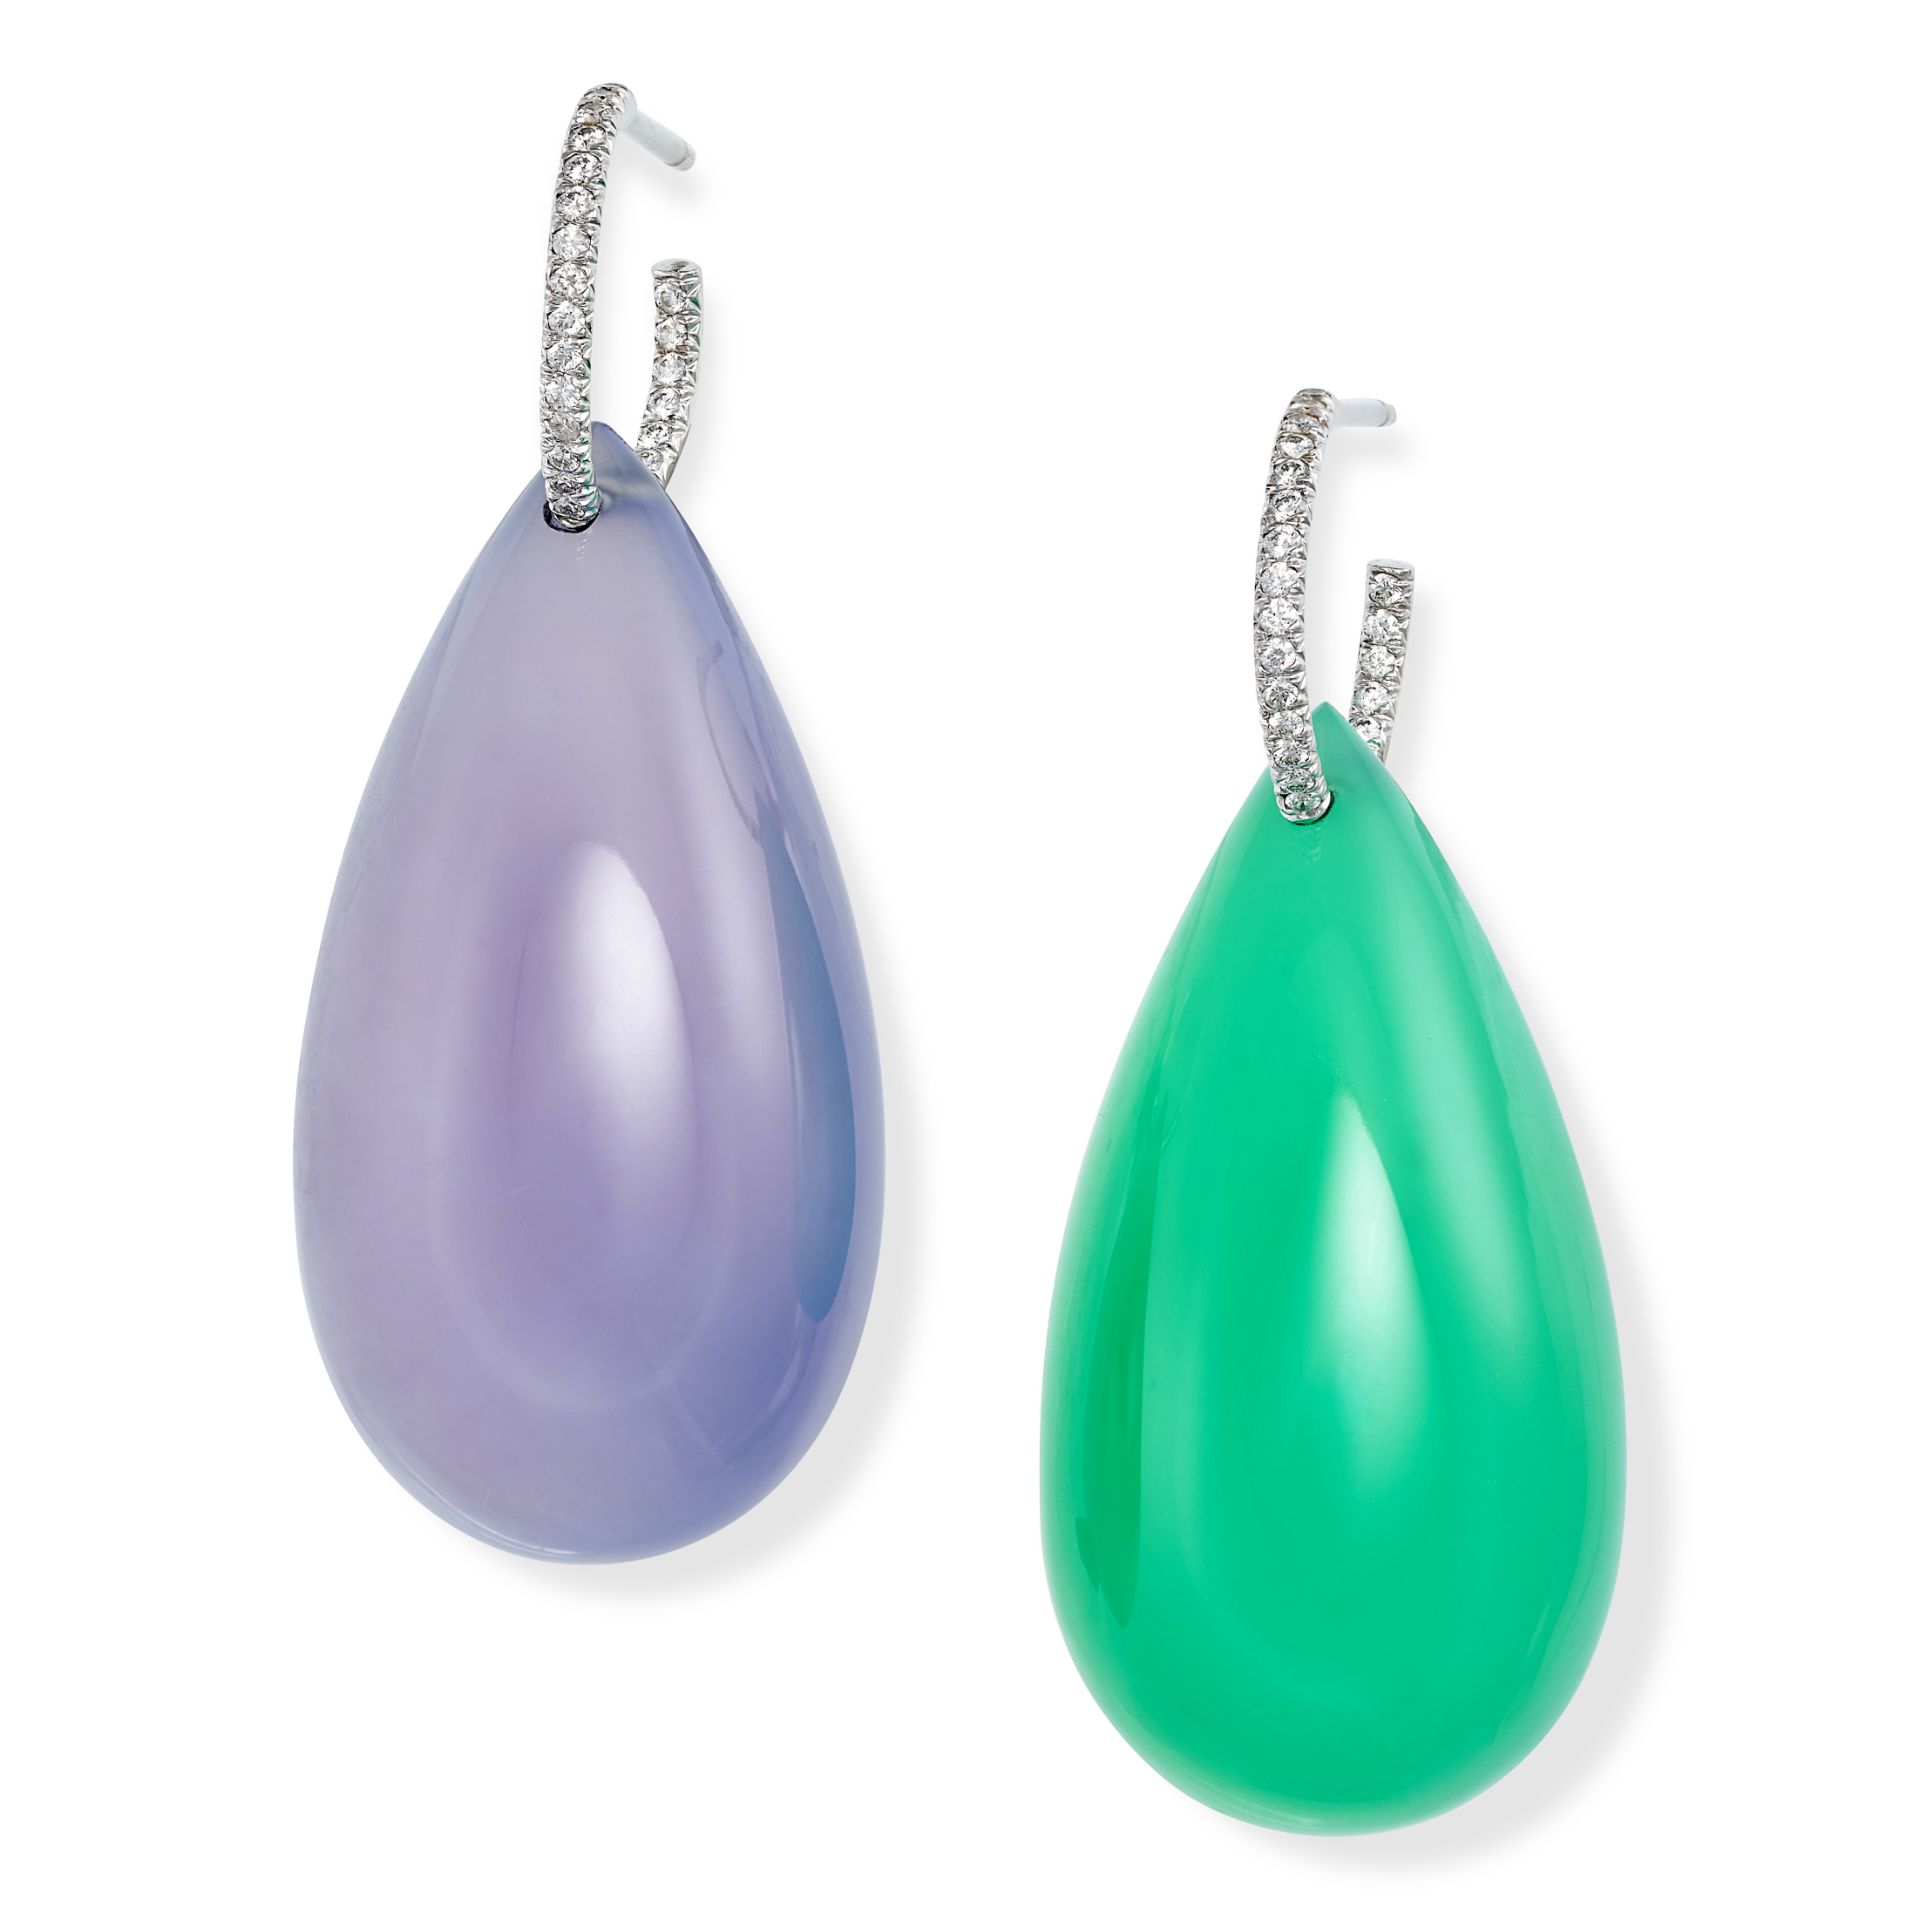 TAFFIN, A PAIR OF CHALCEDONY AND DIAMOND DROP EARRINGS in 18ct white gold, each earring with a ro...